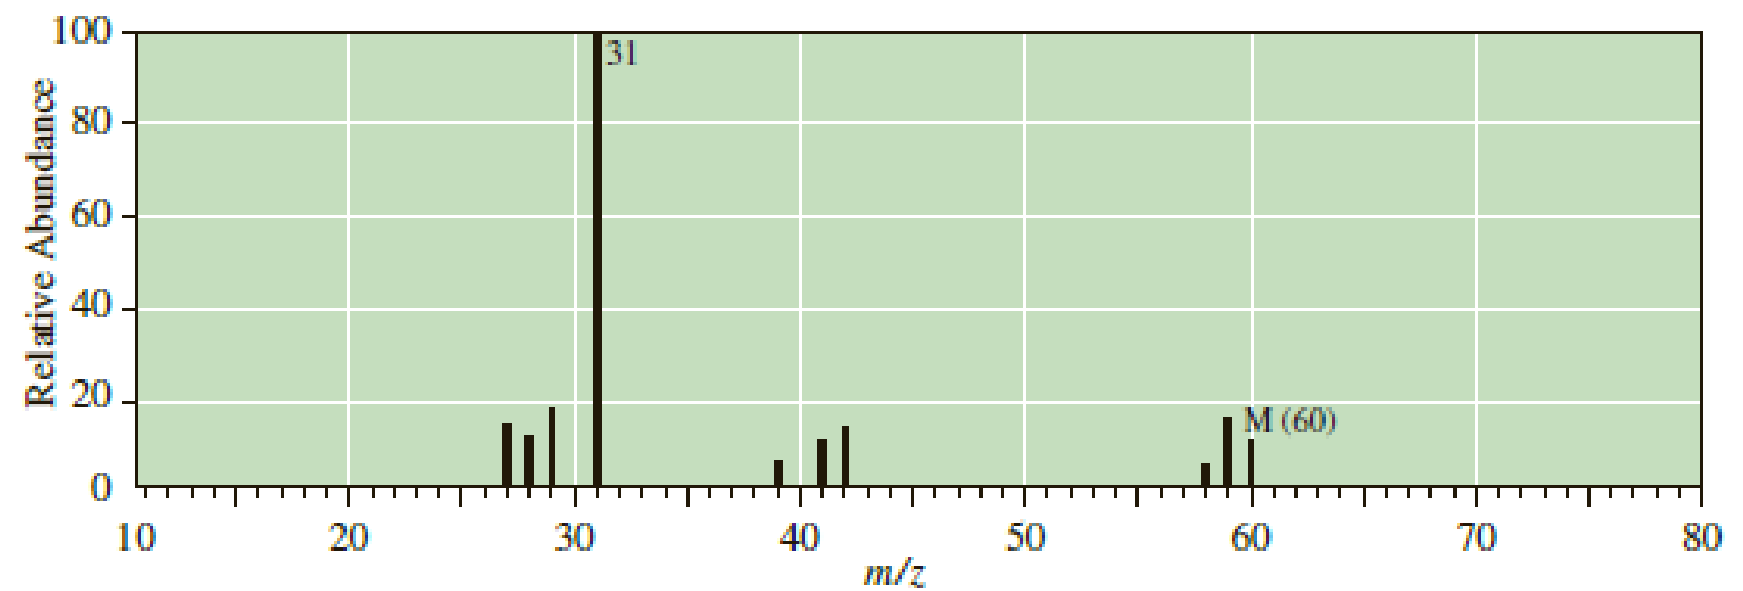 The Following Is The Mass Spectrum Of Compound C C 3 H 8 O Compound C Is Infinitely Soluble In Water Undergoes Reaction With Sodium Metal With The Evolution Of A Gas